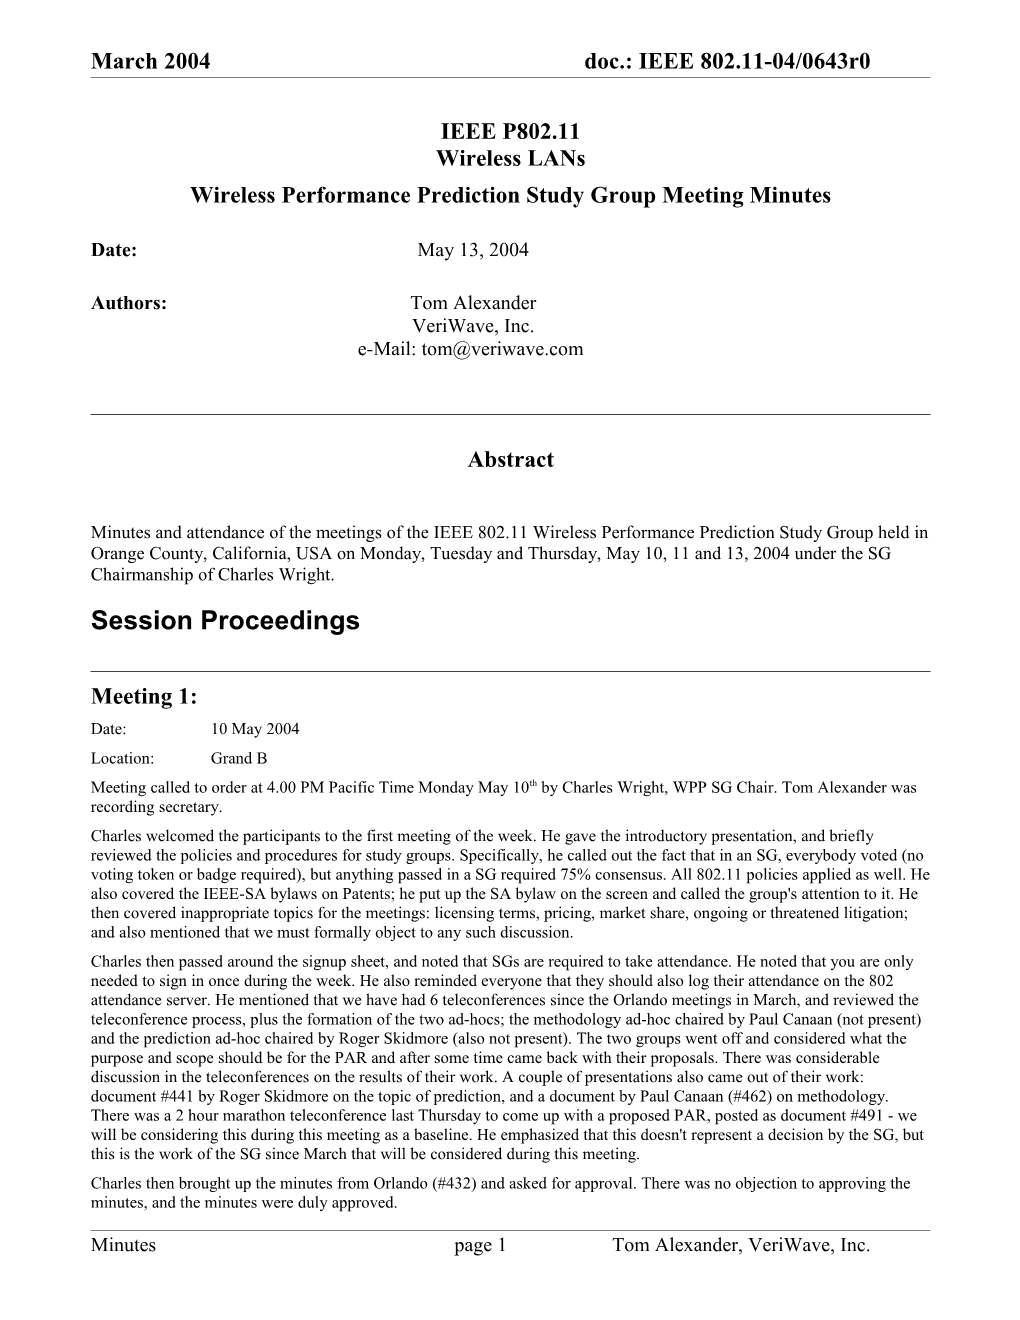 Wireless Performance Prediction Study Group Meeting Minutes